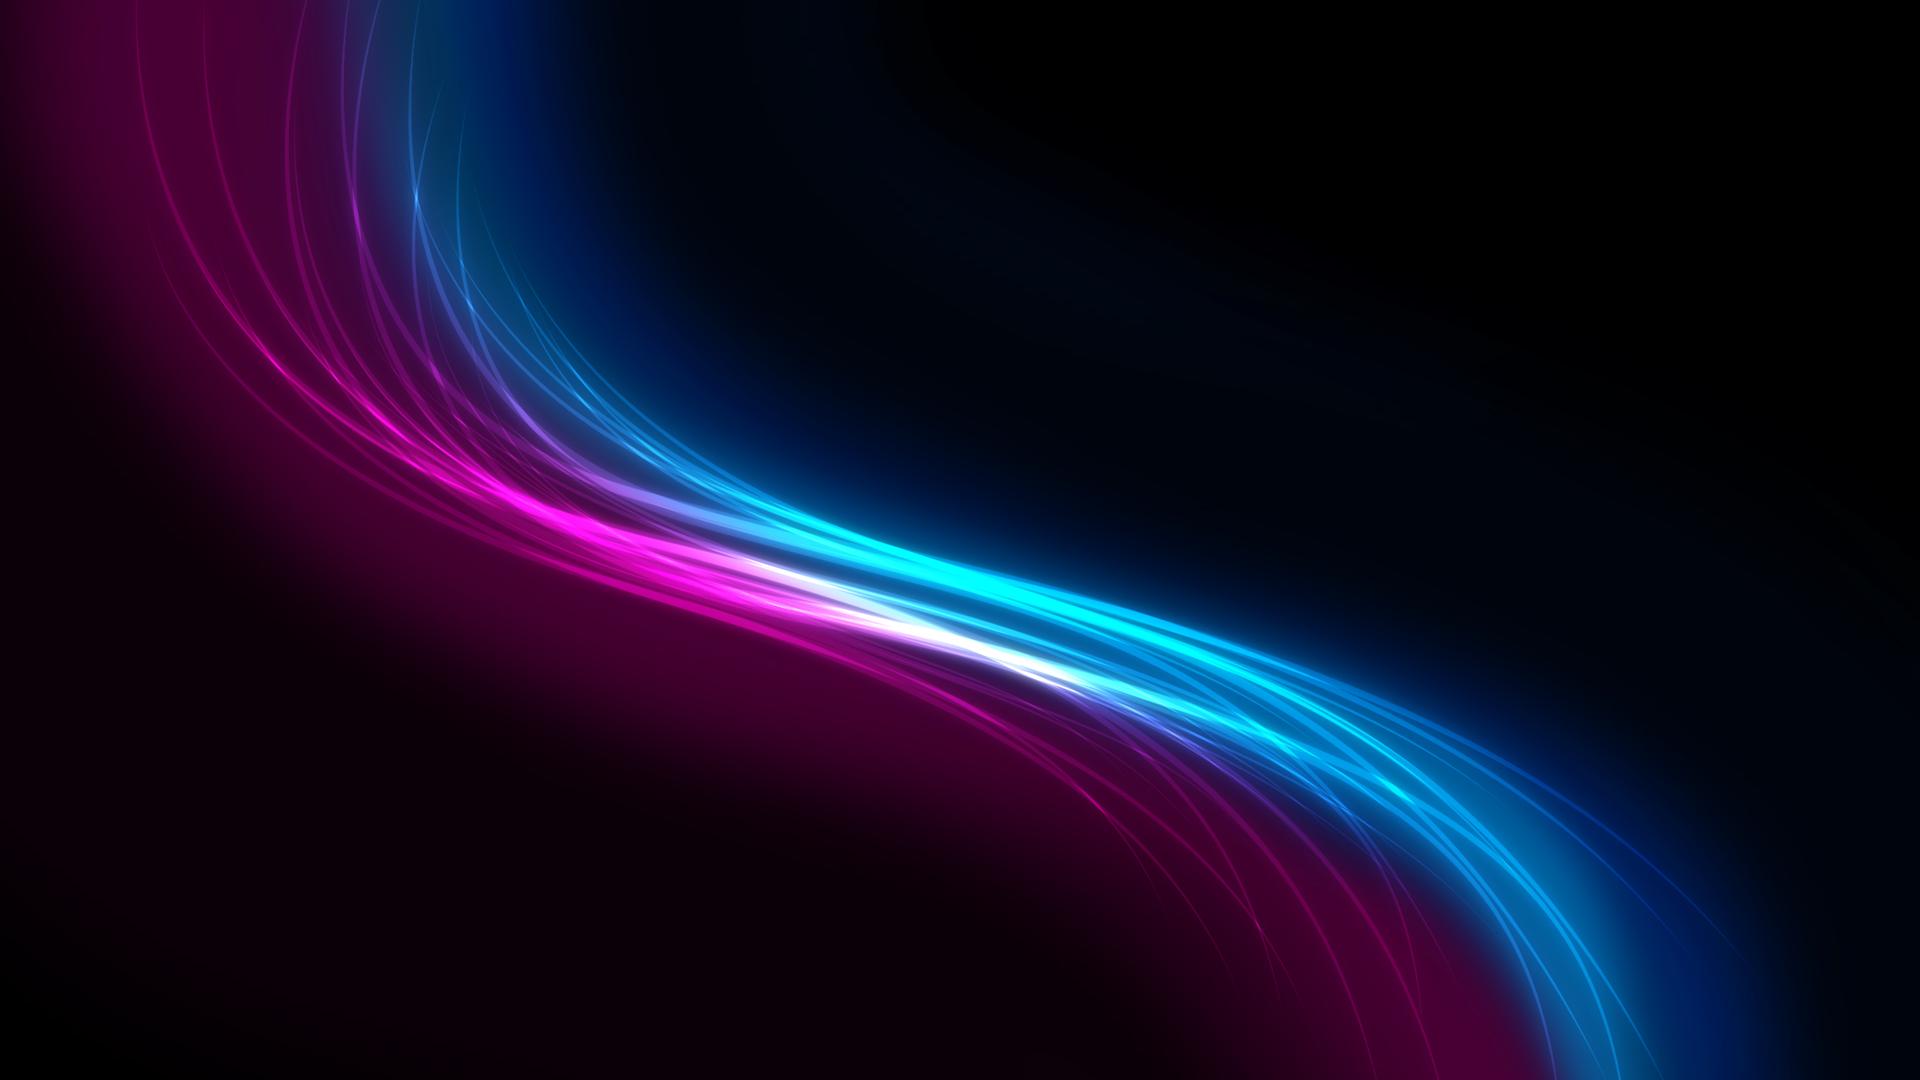 1920x1080 Red and blue light background wide wallpapers1280x800